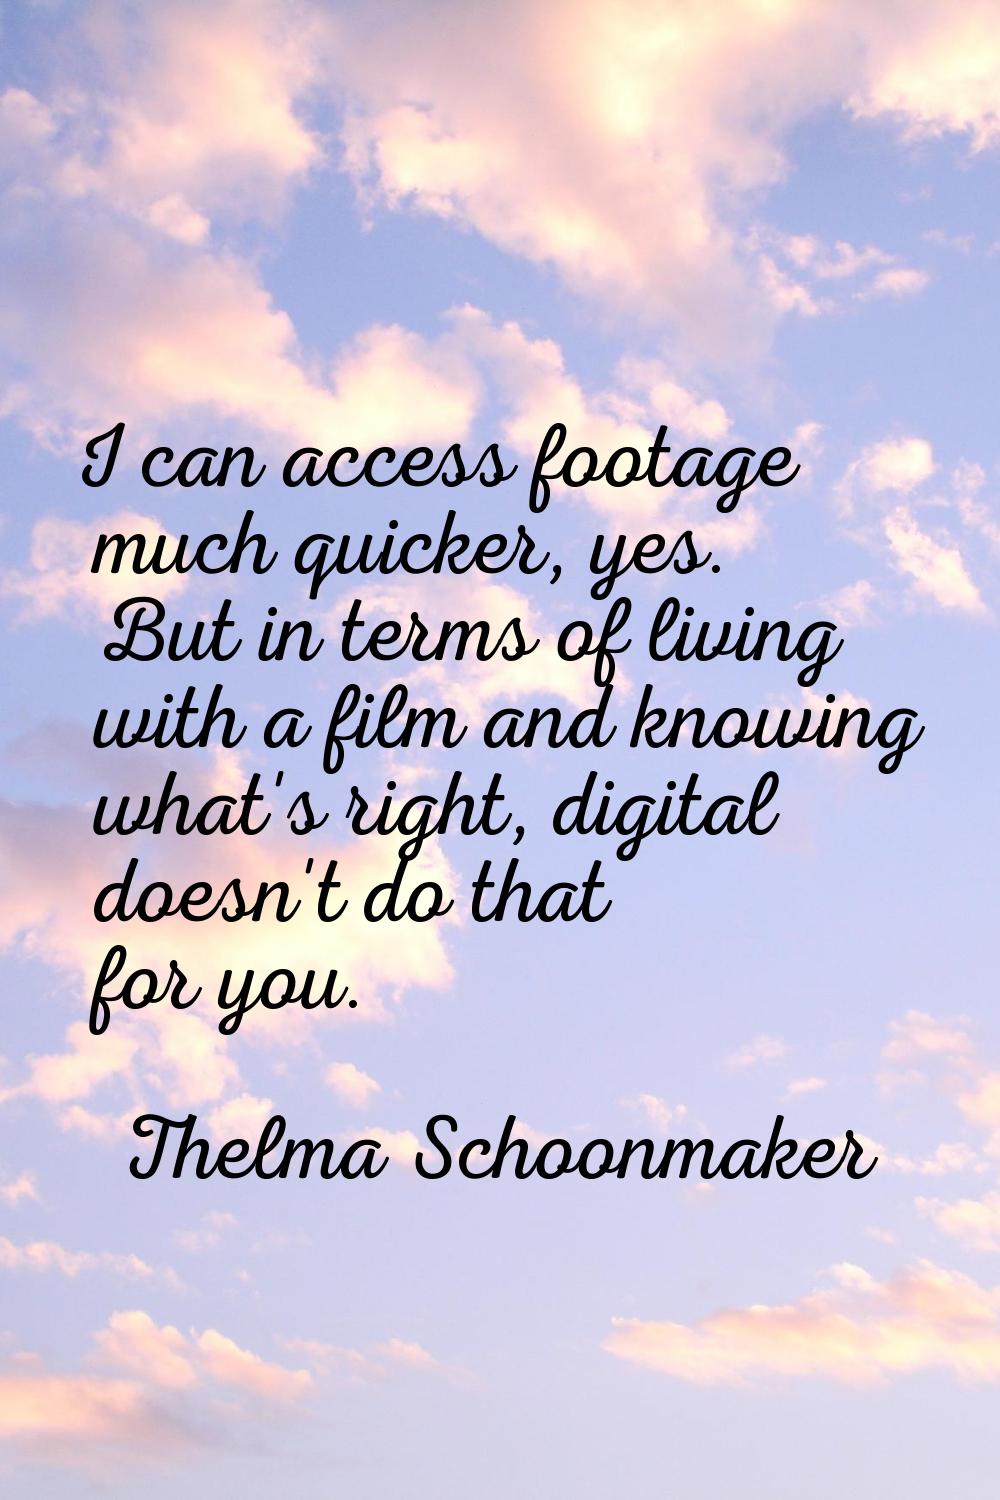 I can access footage much quicker, yes. But in terms of living with a film and knowing what's right